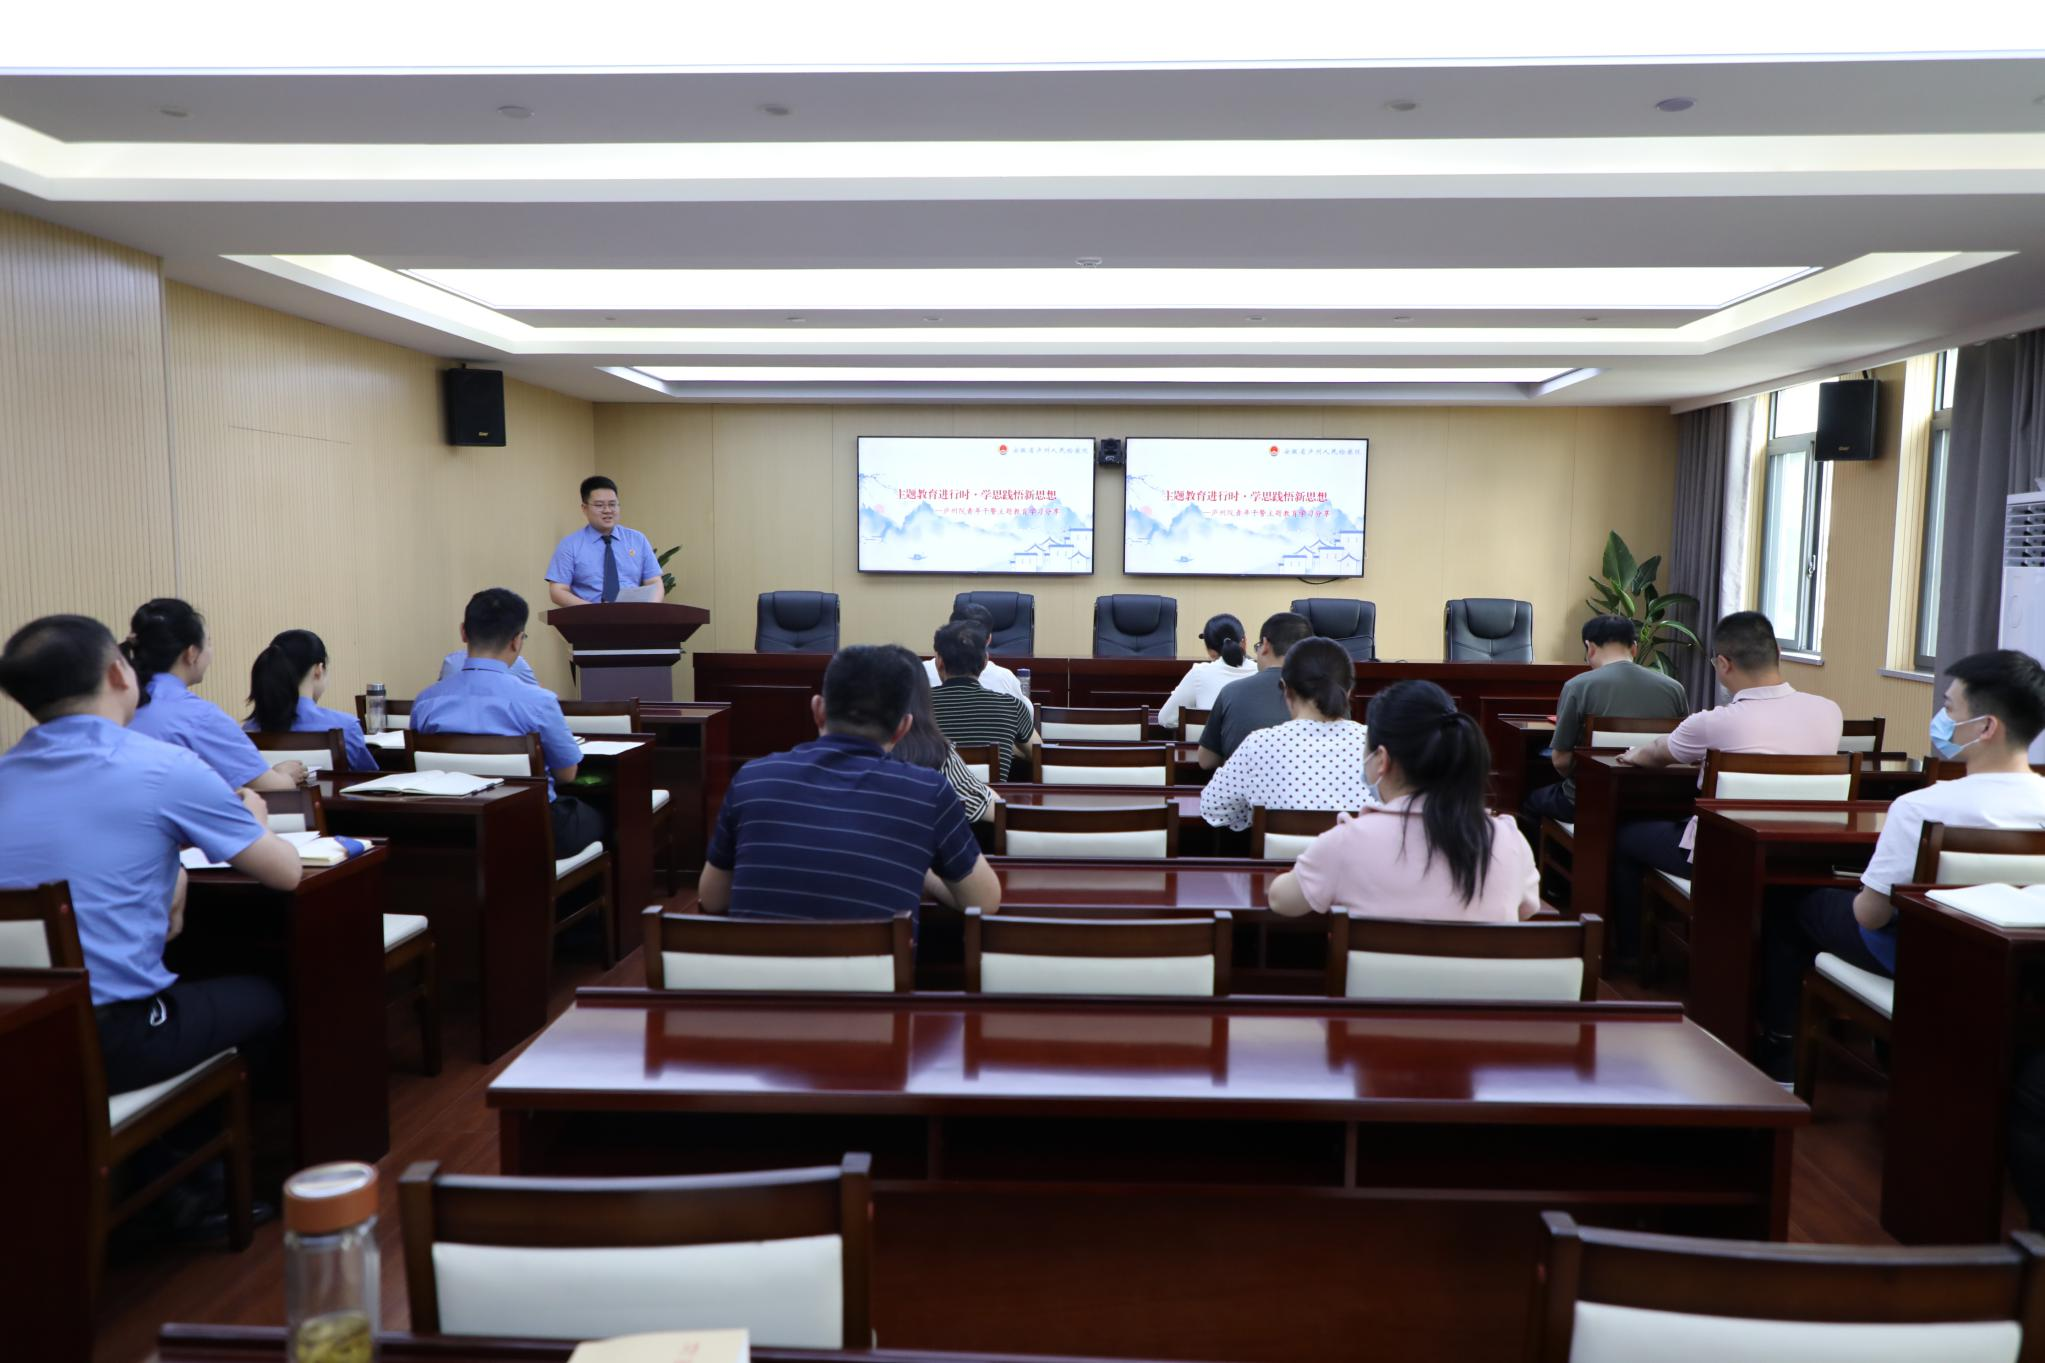  Thematic education: learning, thinking, practicing, and understanding new ideas -- Luzhou Academy launched a learning and sharing activity for young police officers